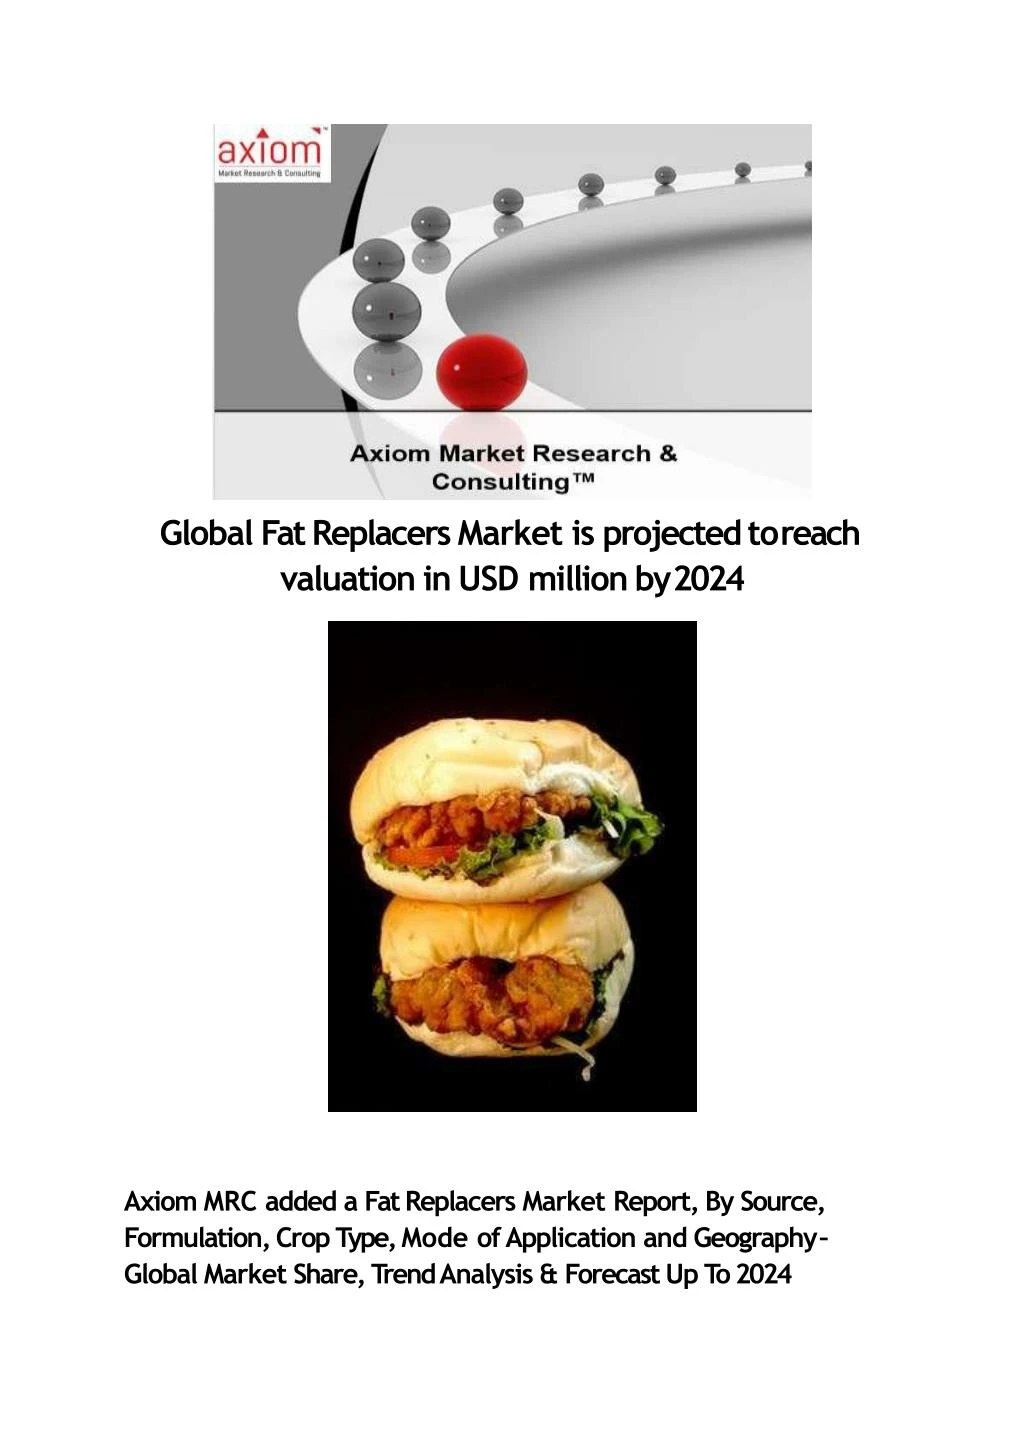 global fat replacers market is projected to reach